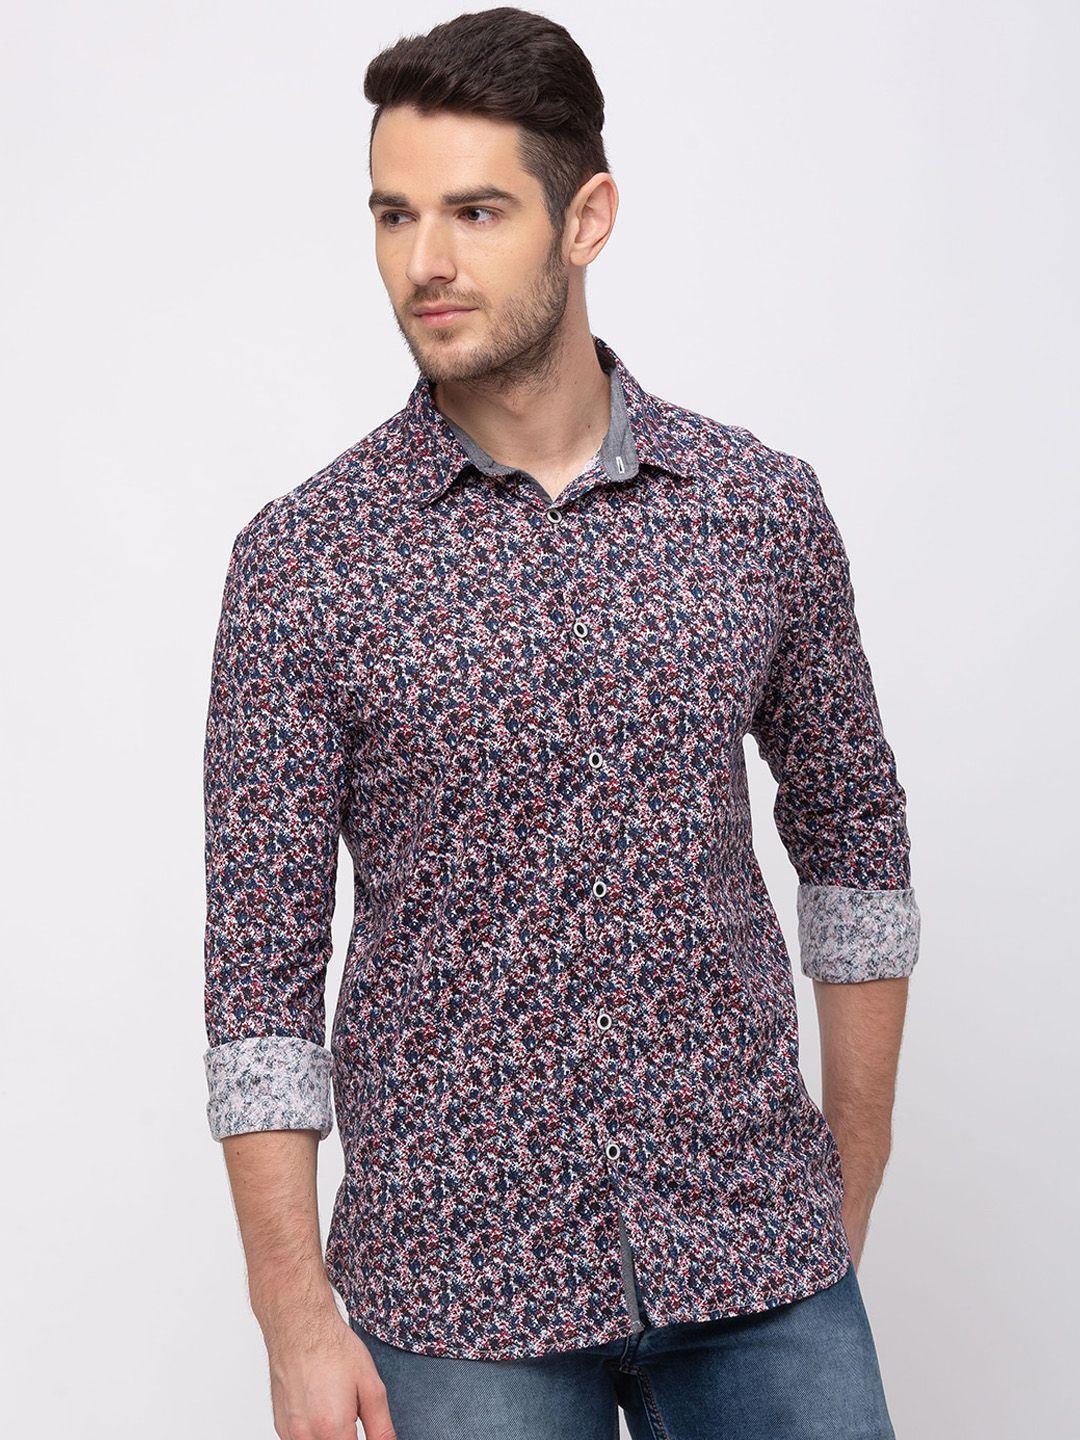 kenneth-cole-men-navy-blue-regular-fit-printed-casual-shirt